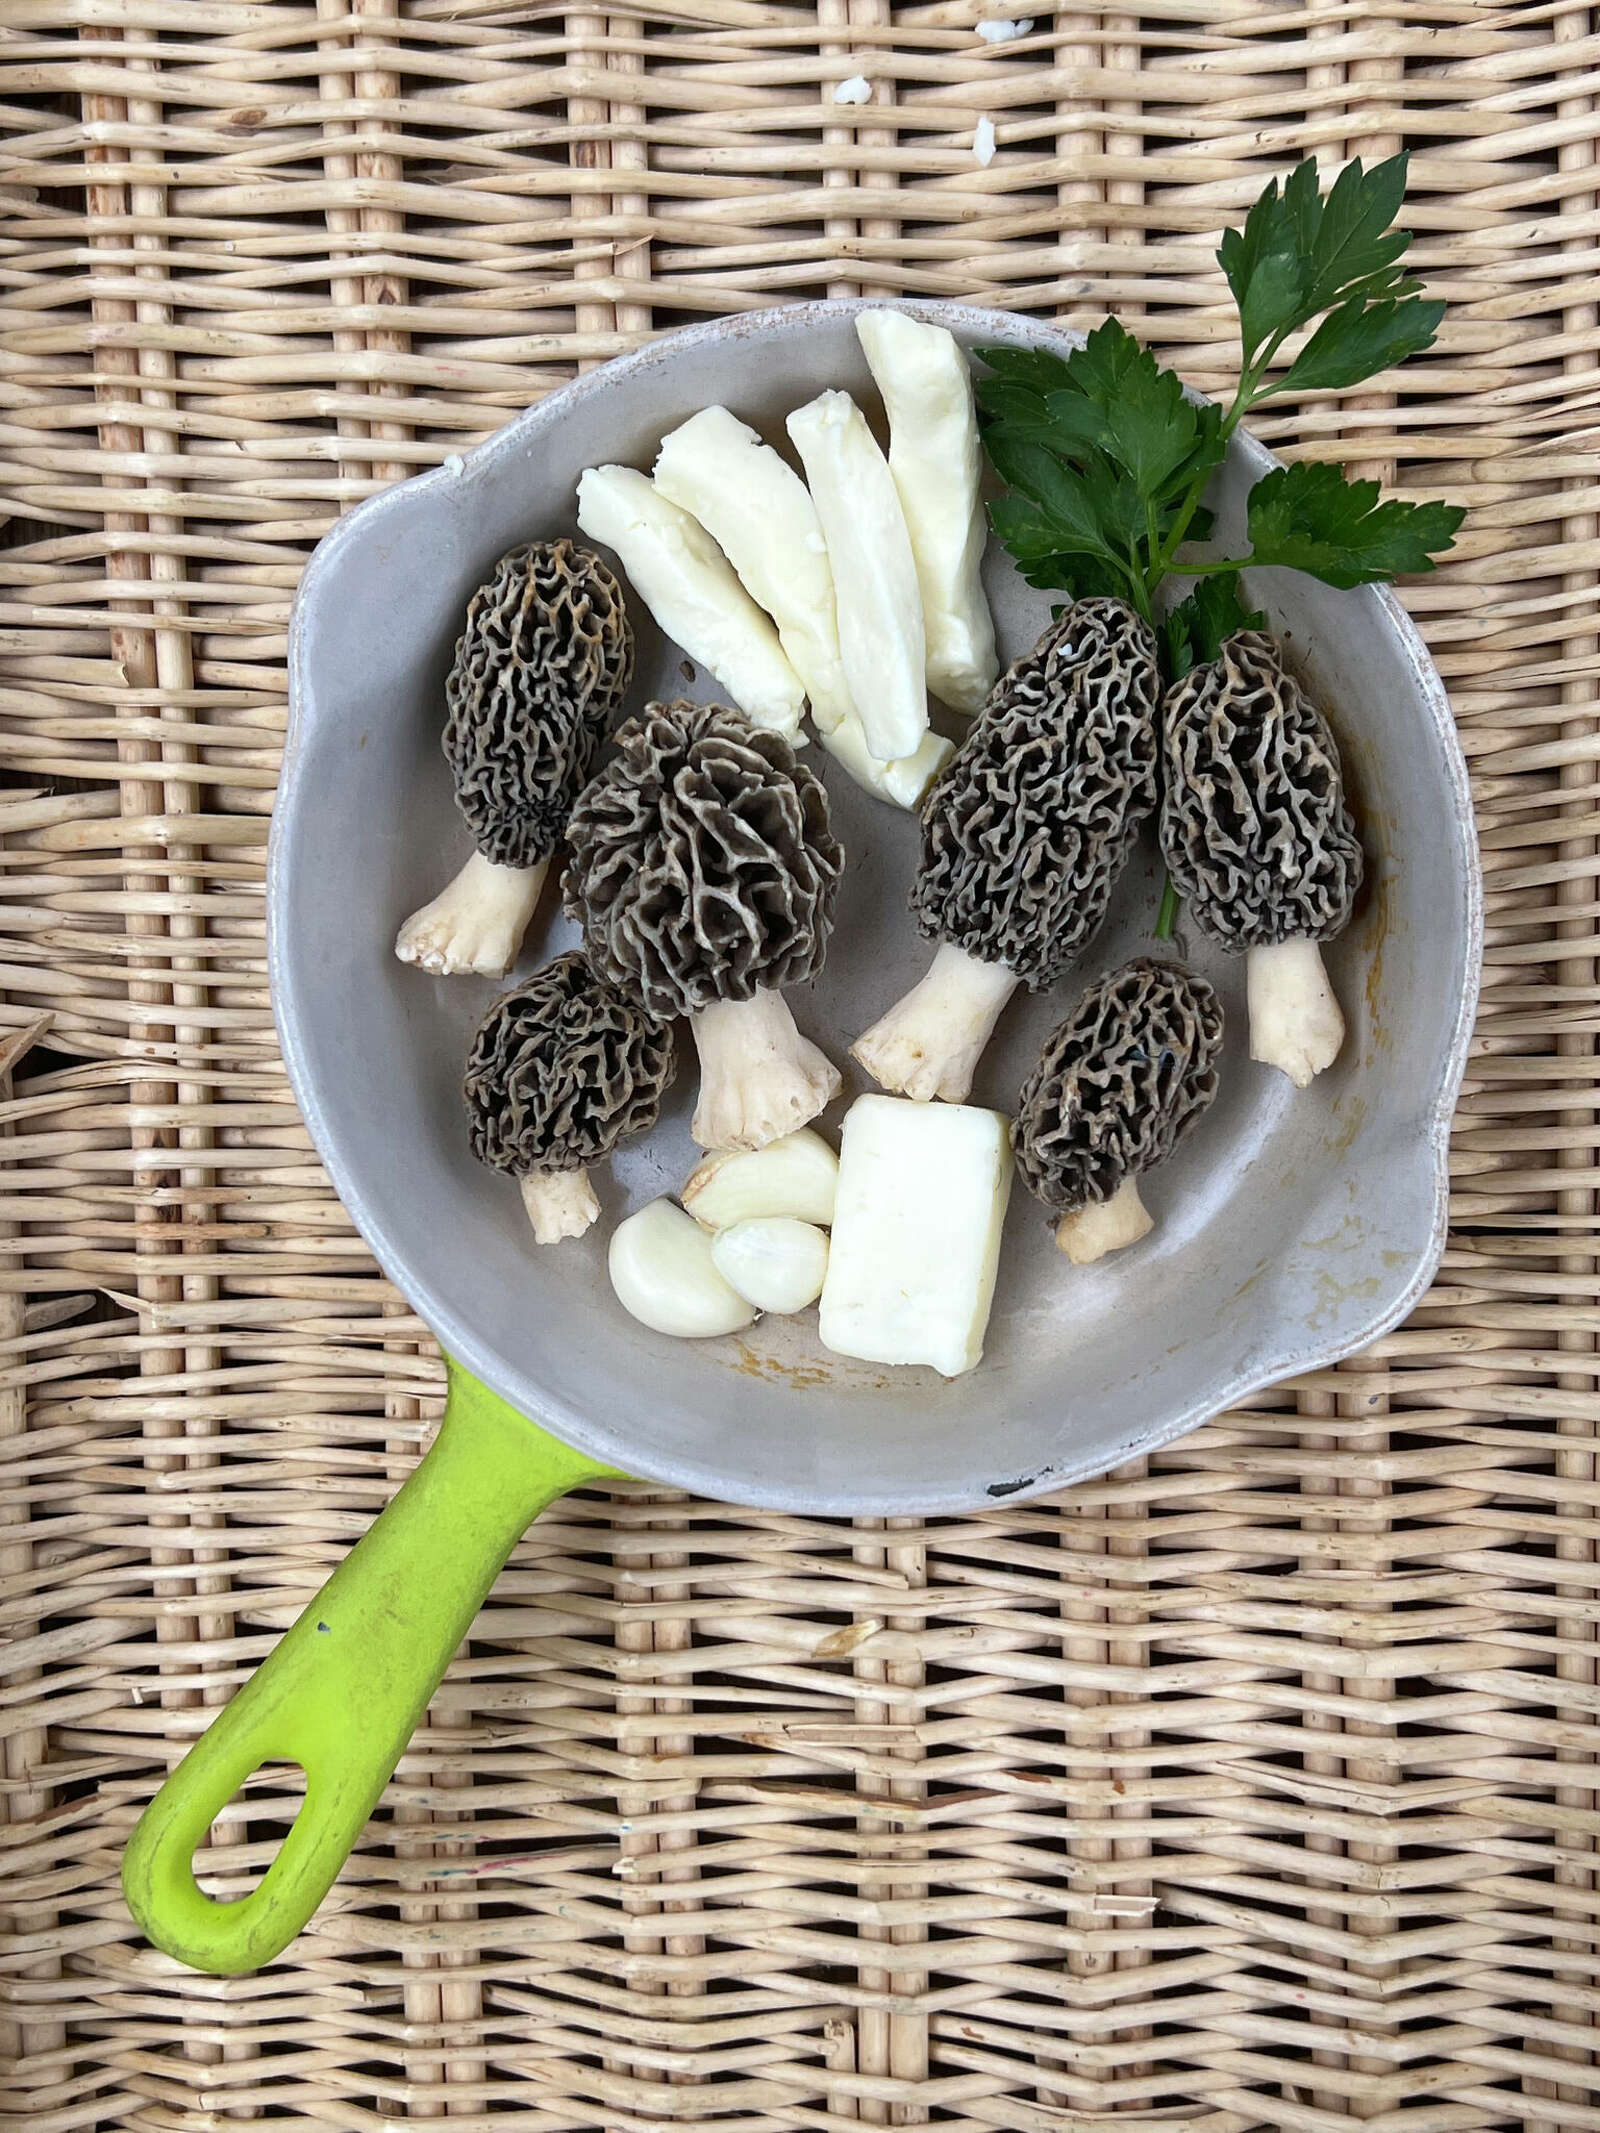 A photo of morel mushrooms in a pan.